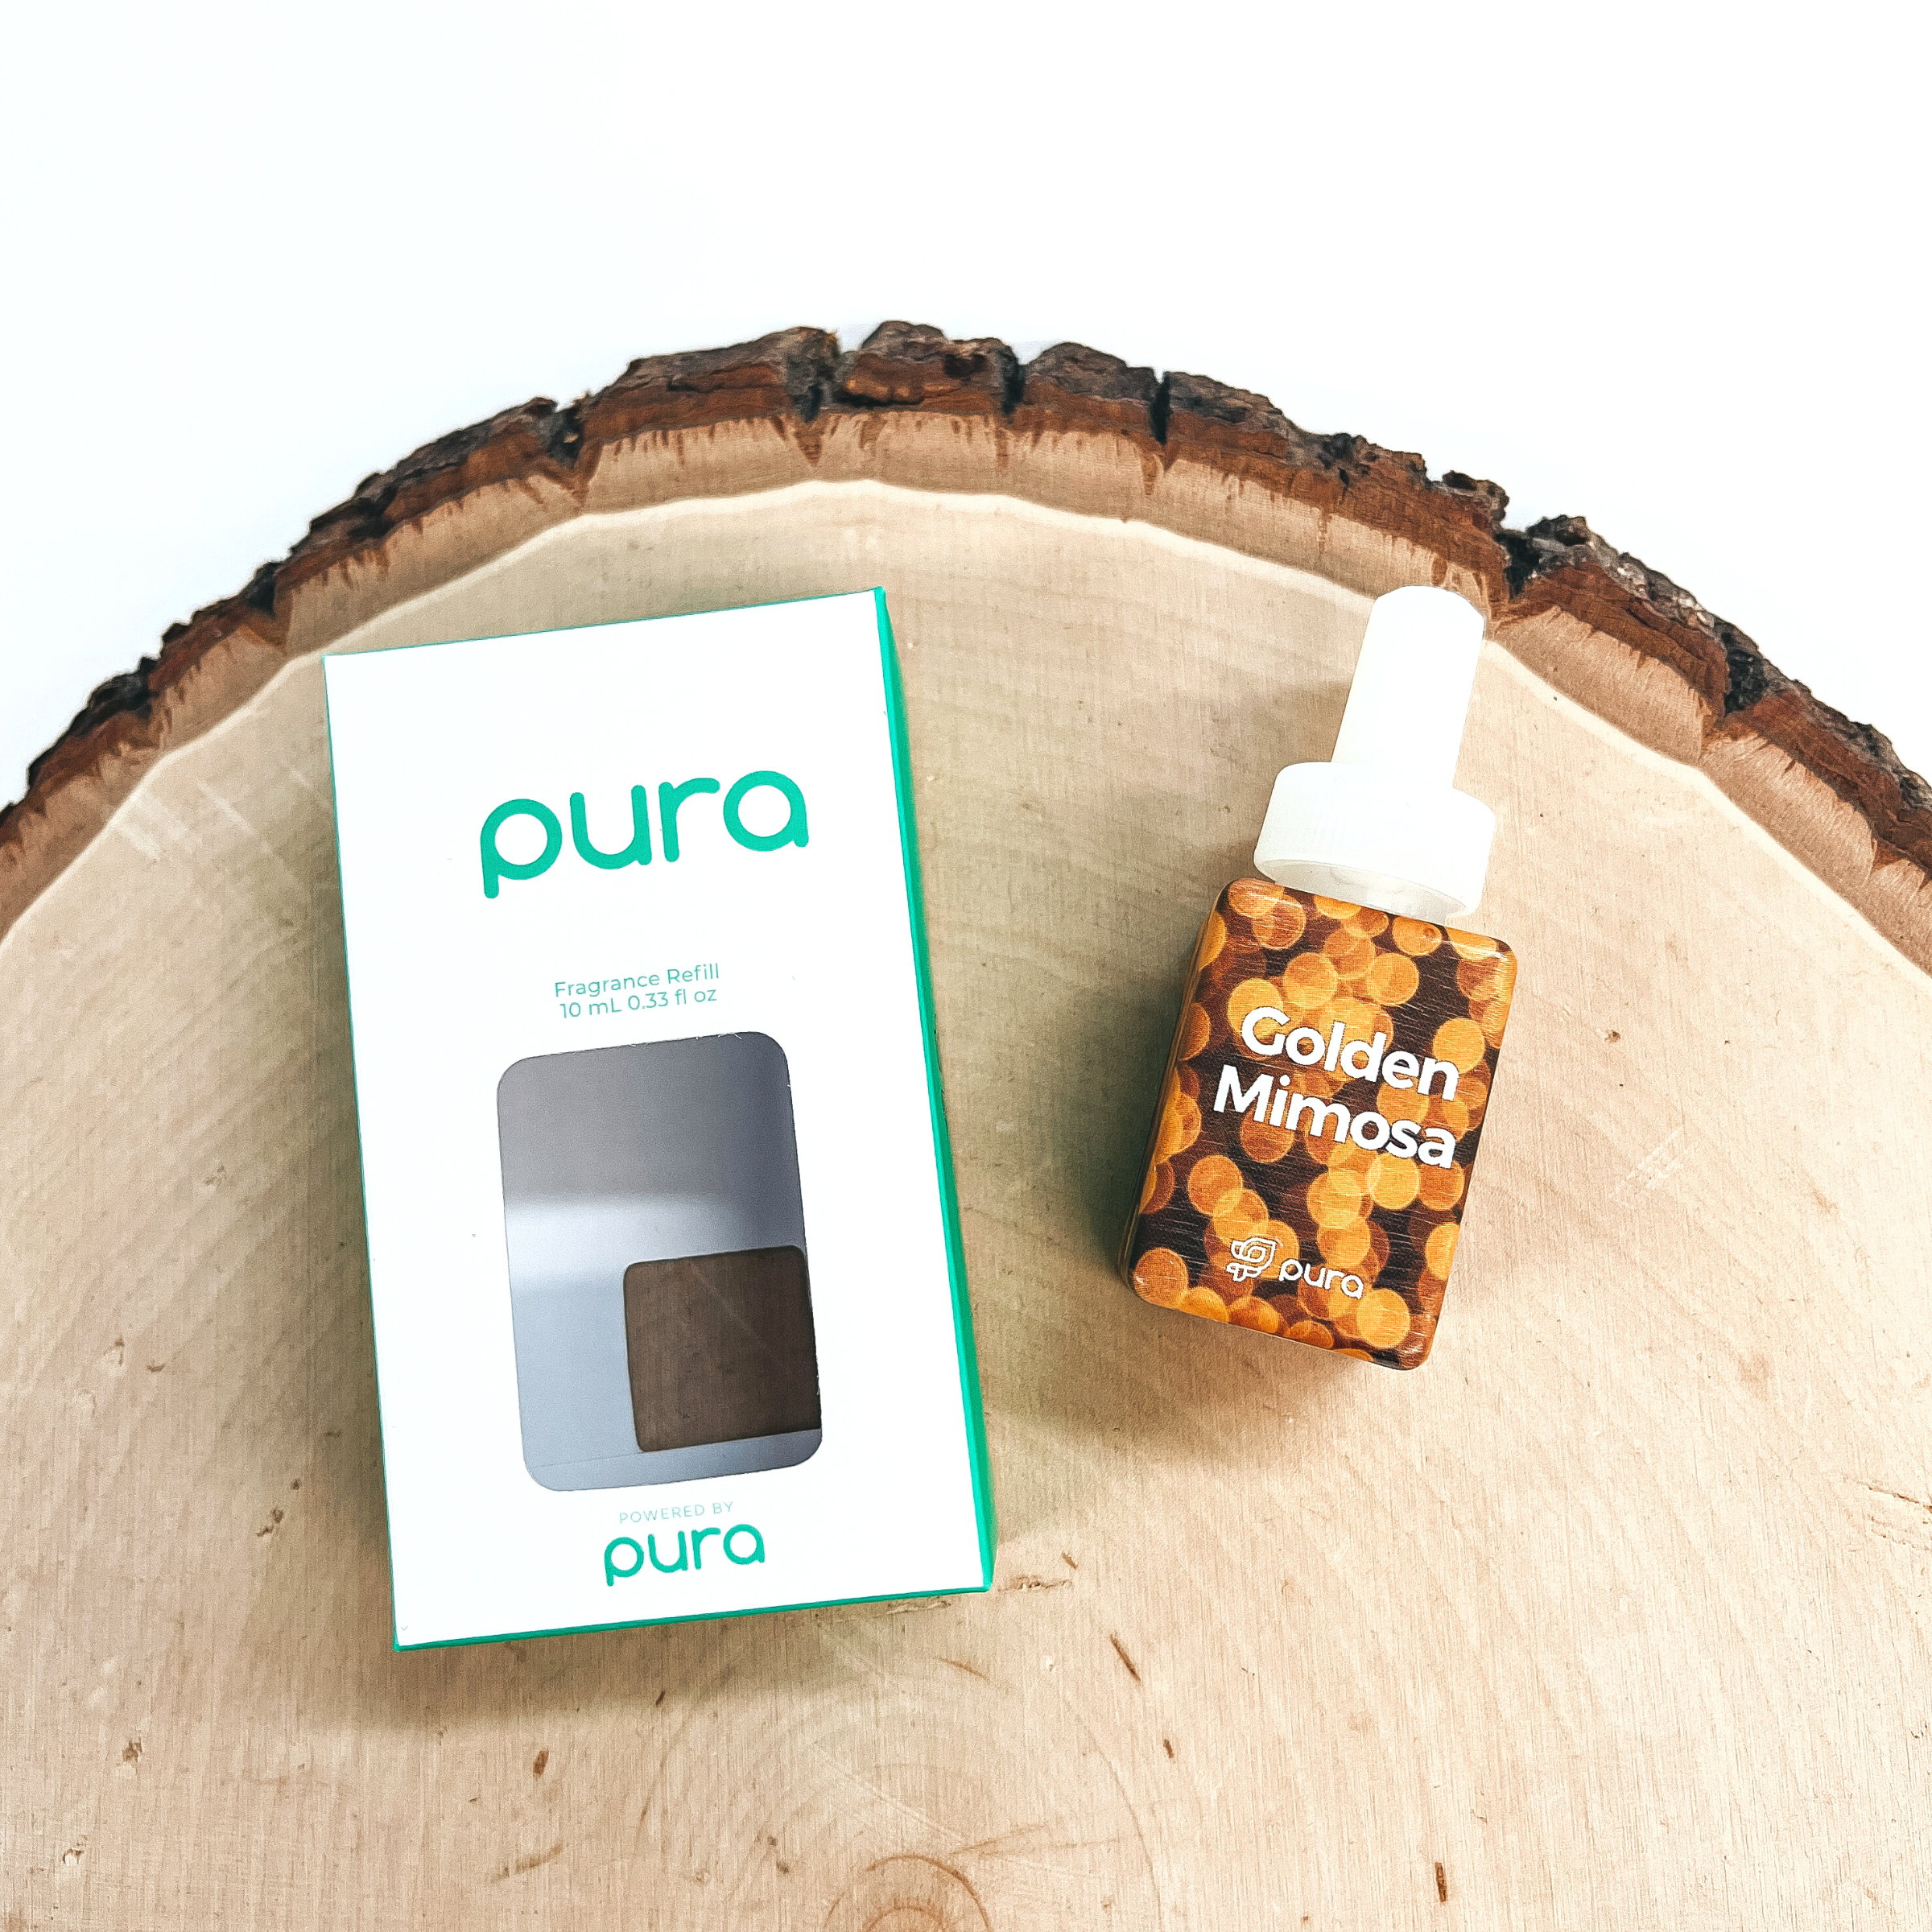 Pura | Replacement Fragrance Inserts for Smart Home Diffuser | Golden Mimosa - Giddy Up Glamour Boutique